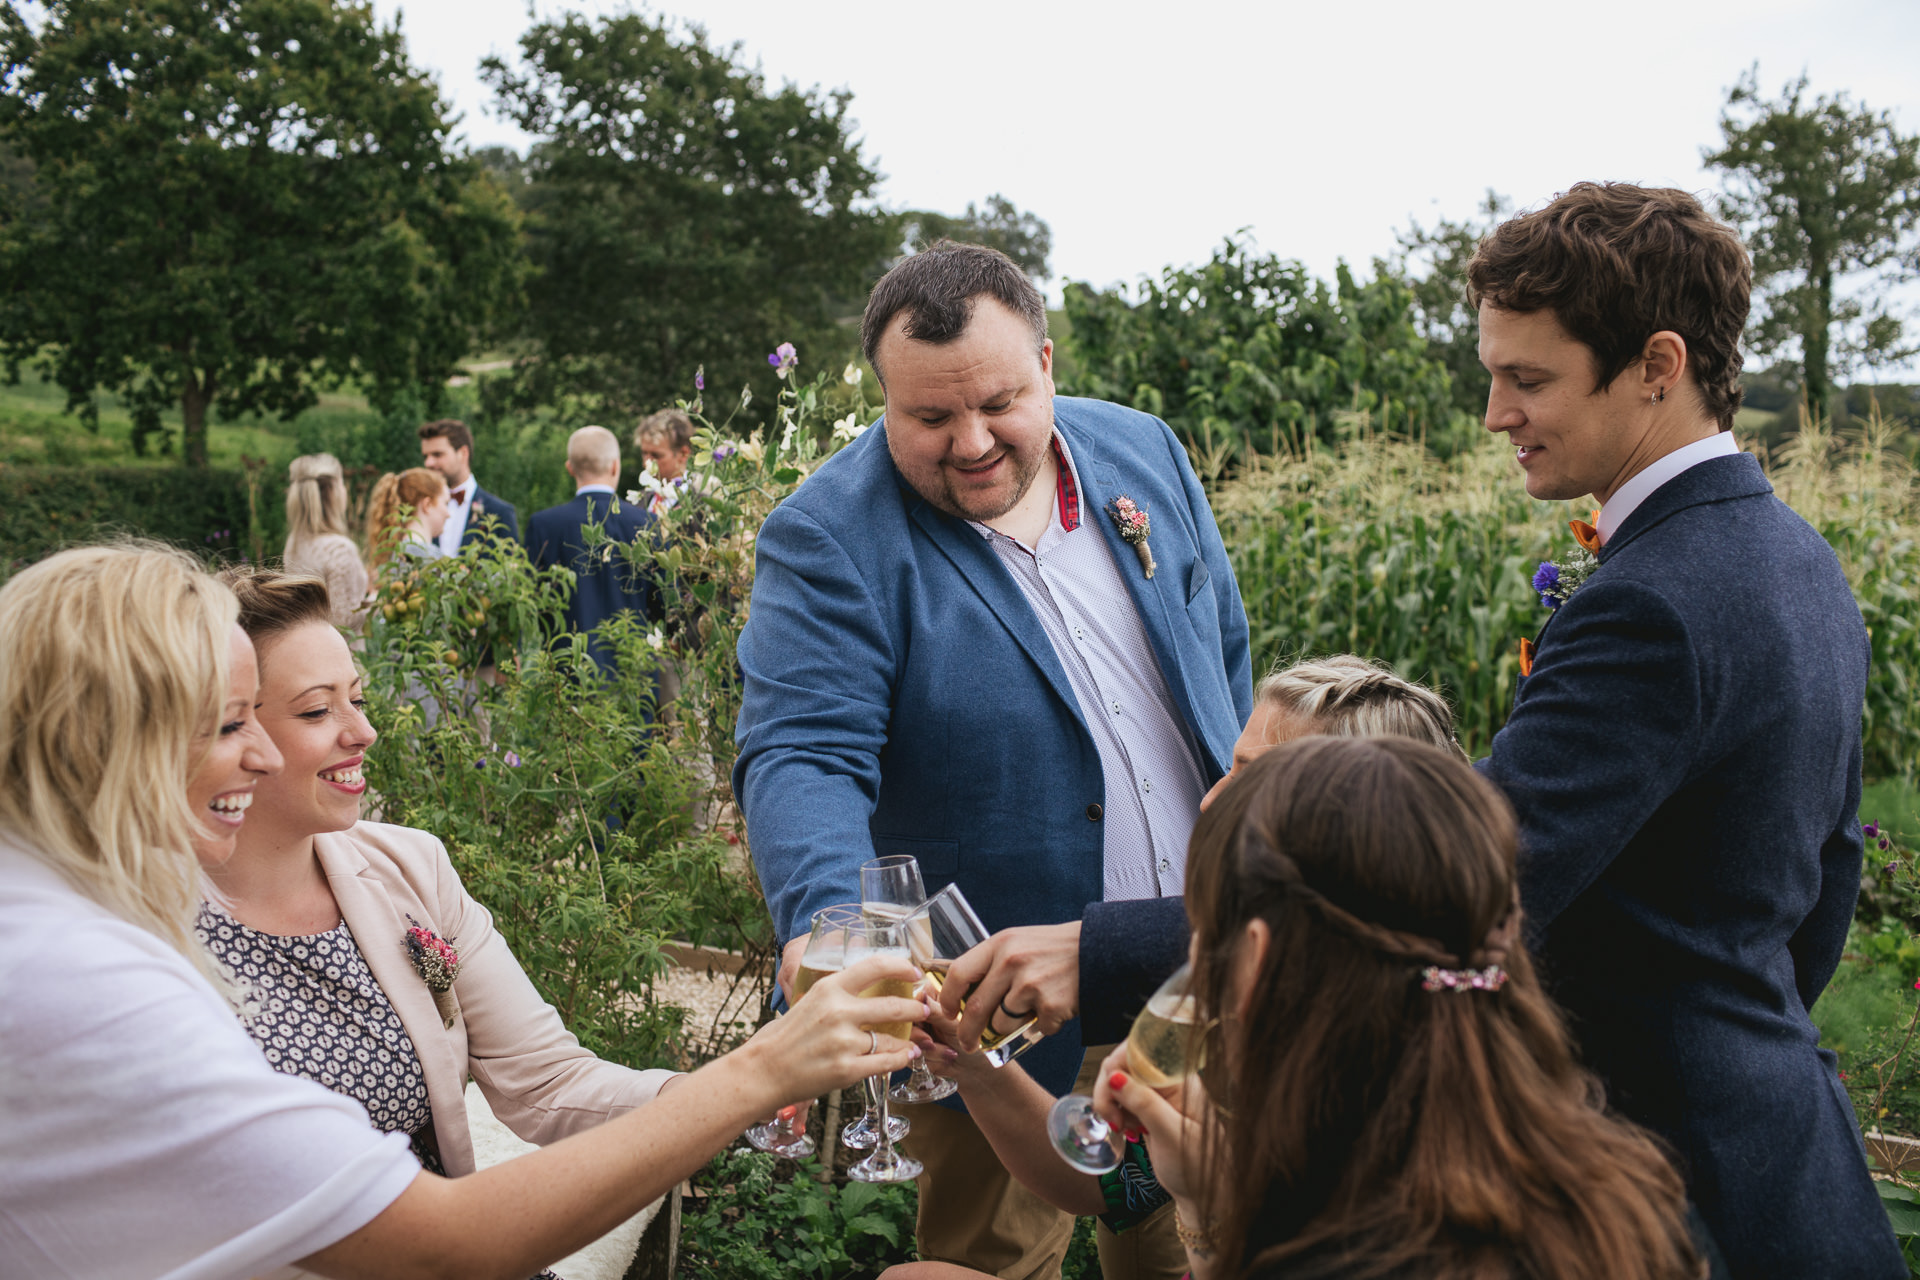 Wedding guests clinking glasses together in the kitchen garden